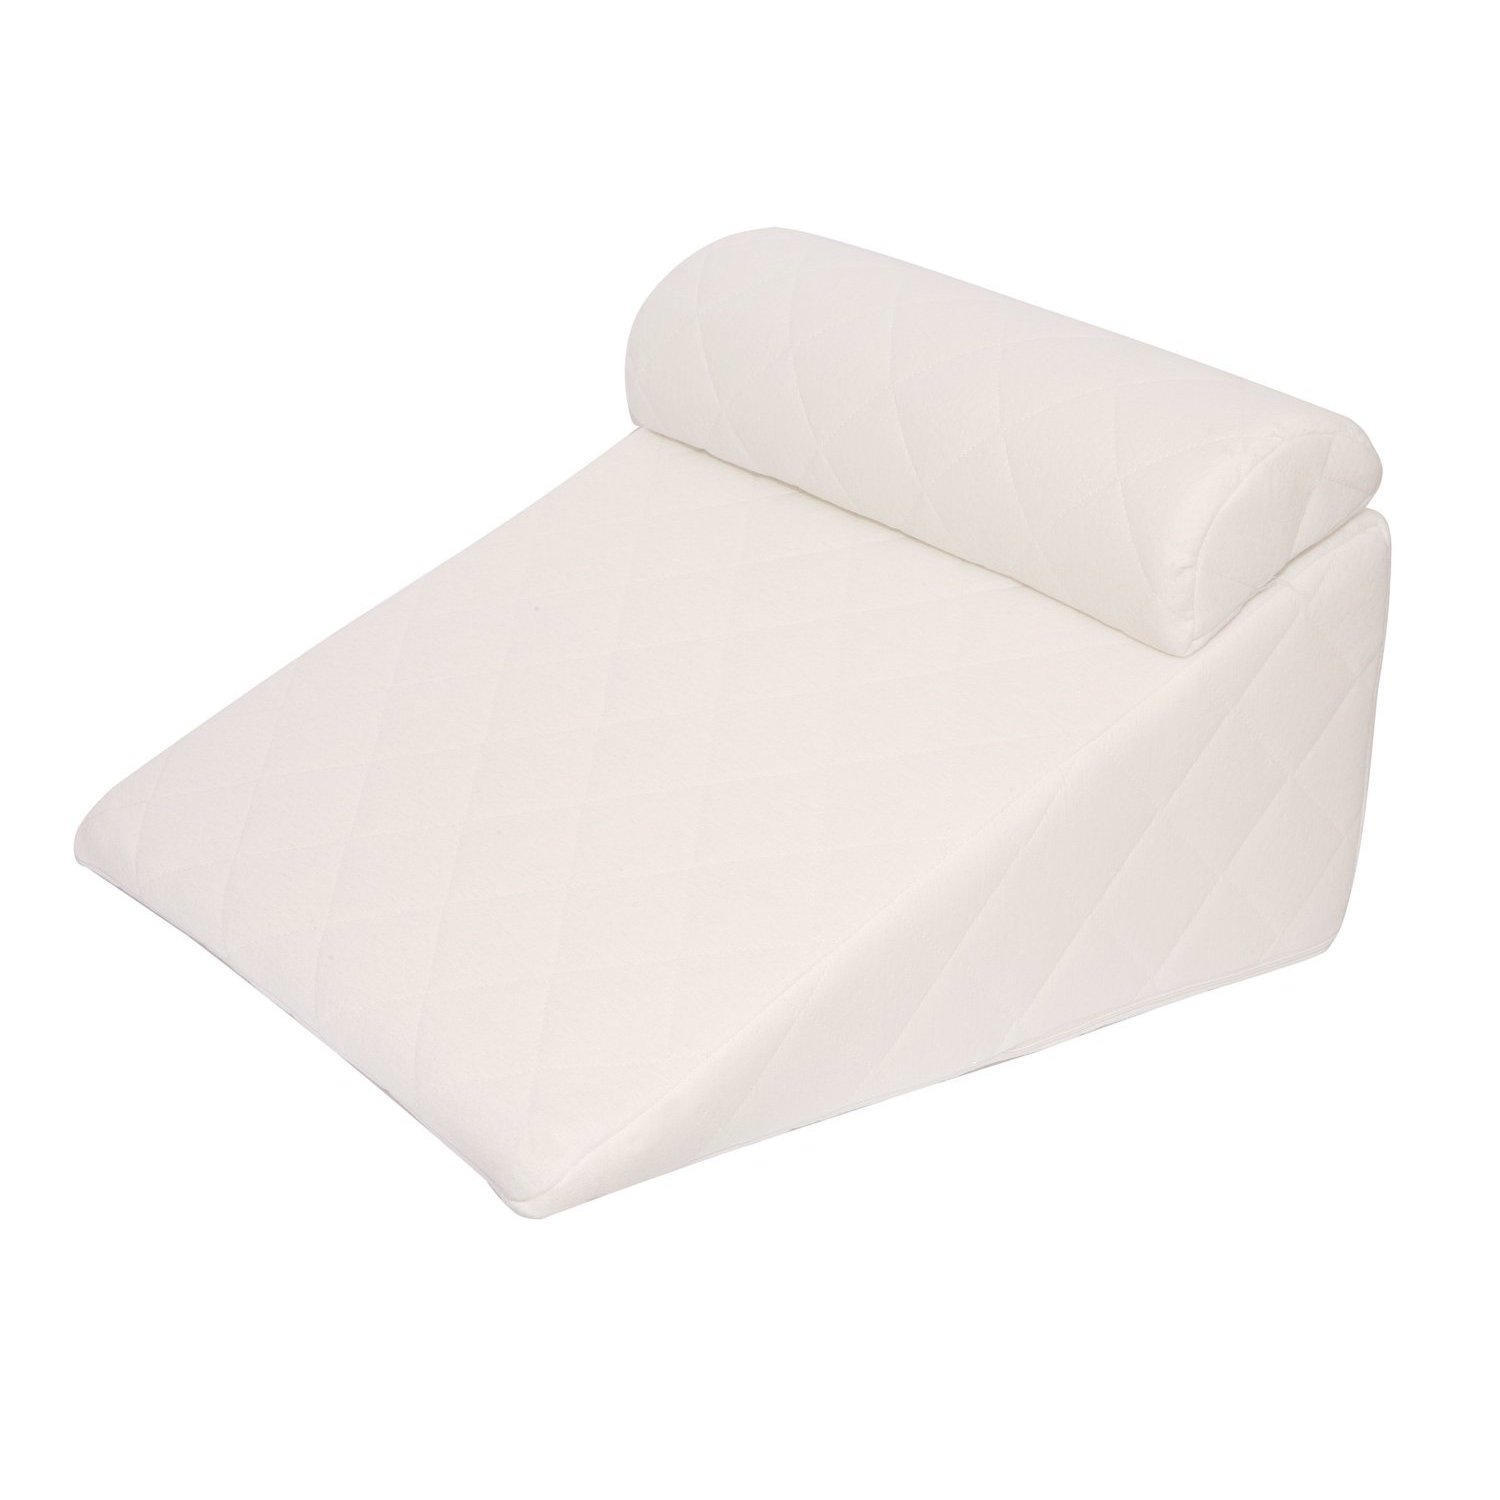 Shop Deluxe Comfort Cover For Bed Wedge Pillow Set 383 Thread